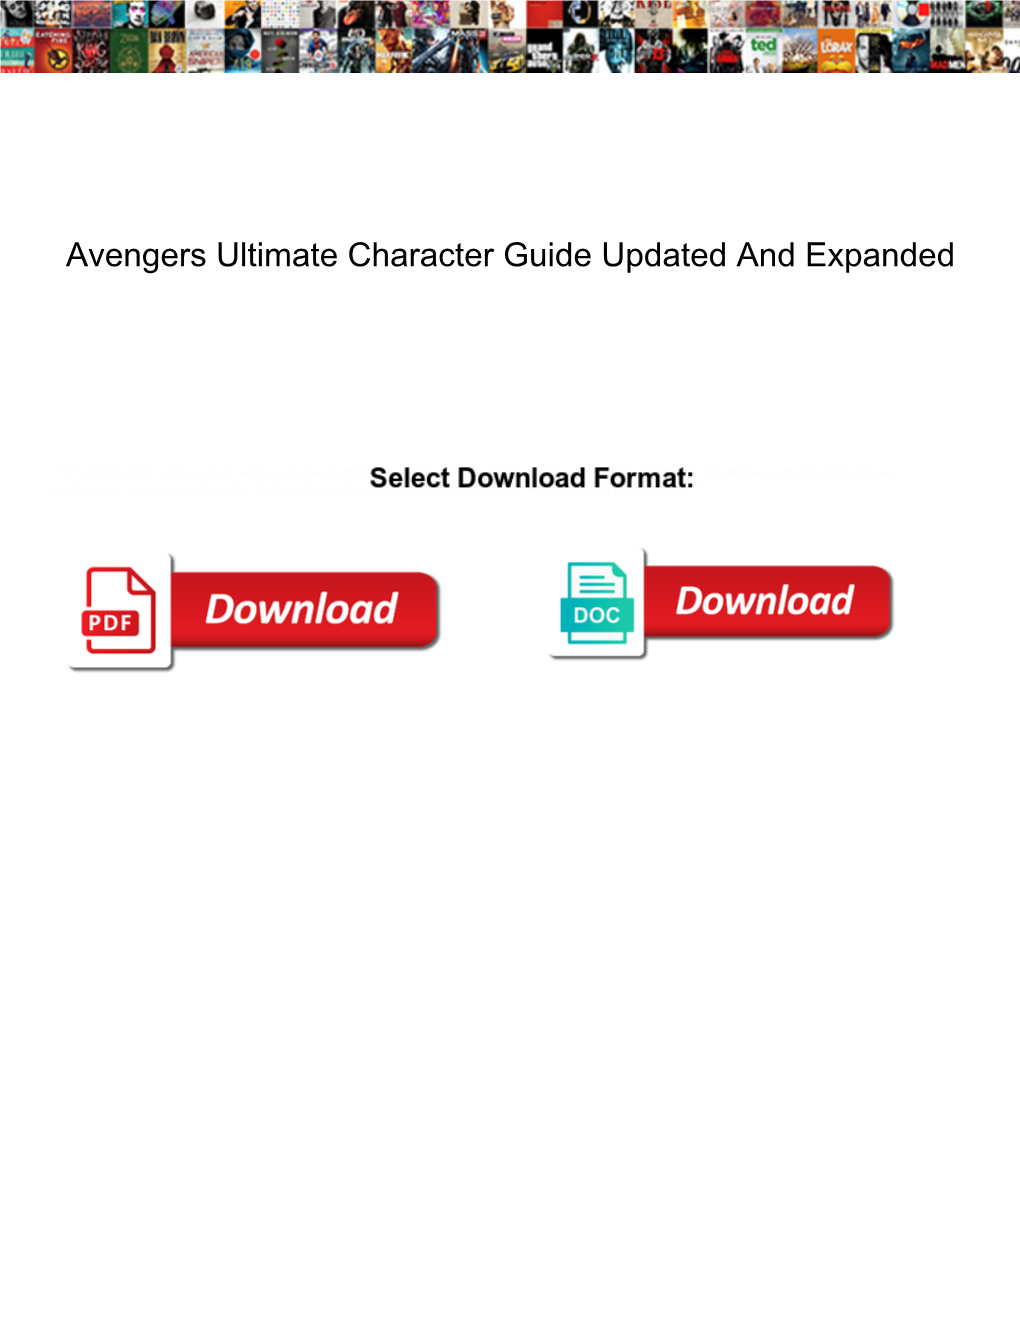 Avengers Ultimate Character Guide Updated and Expanded